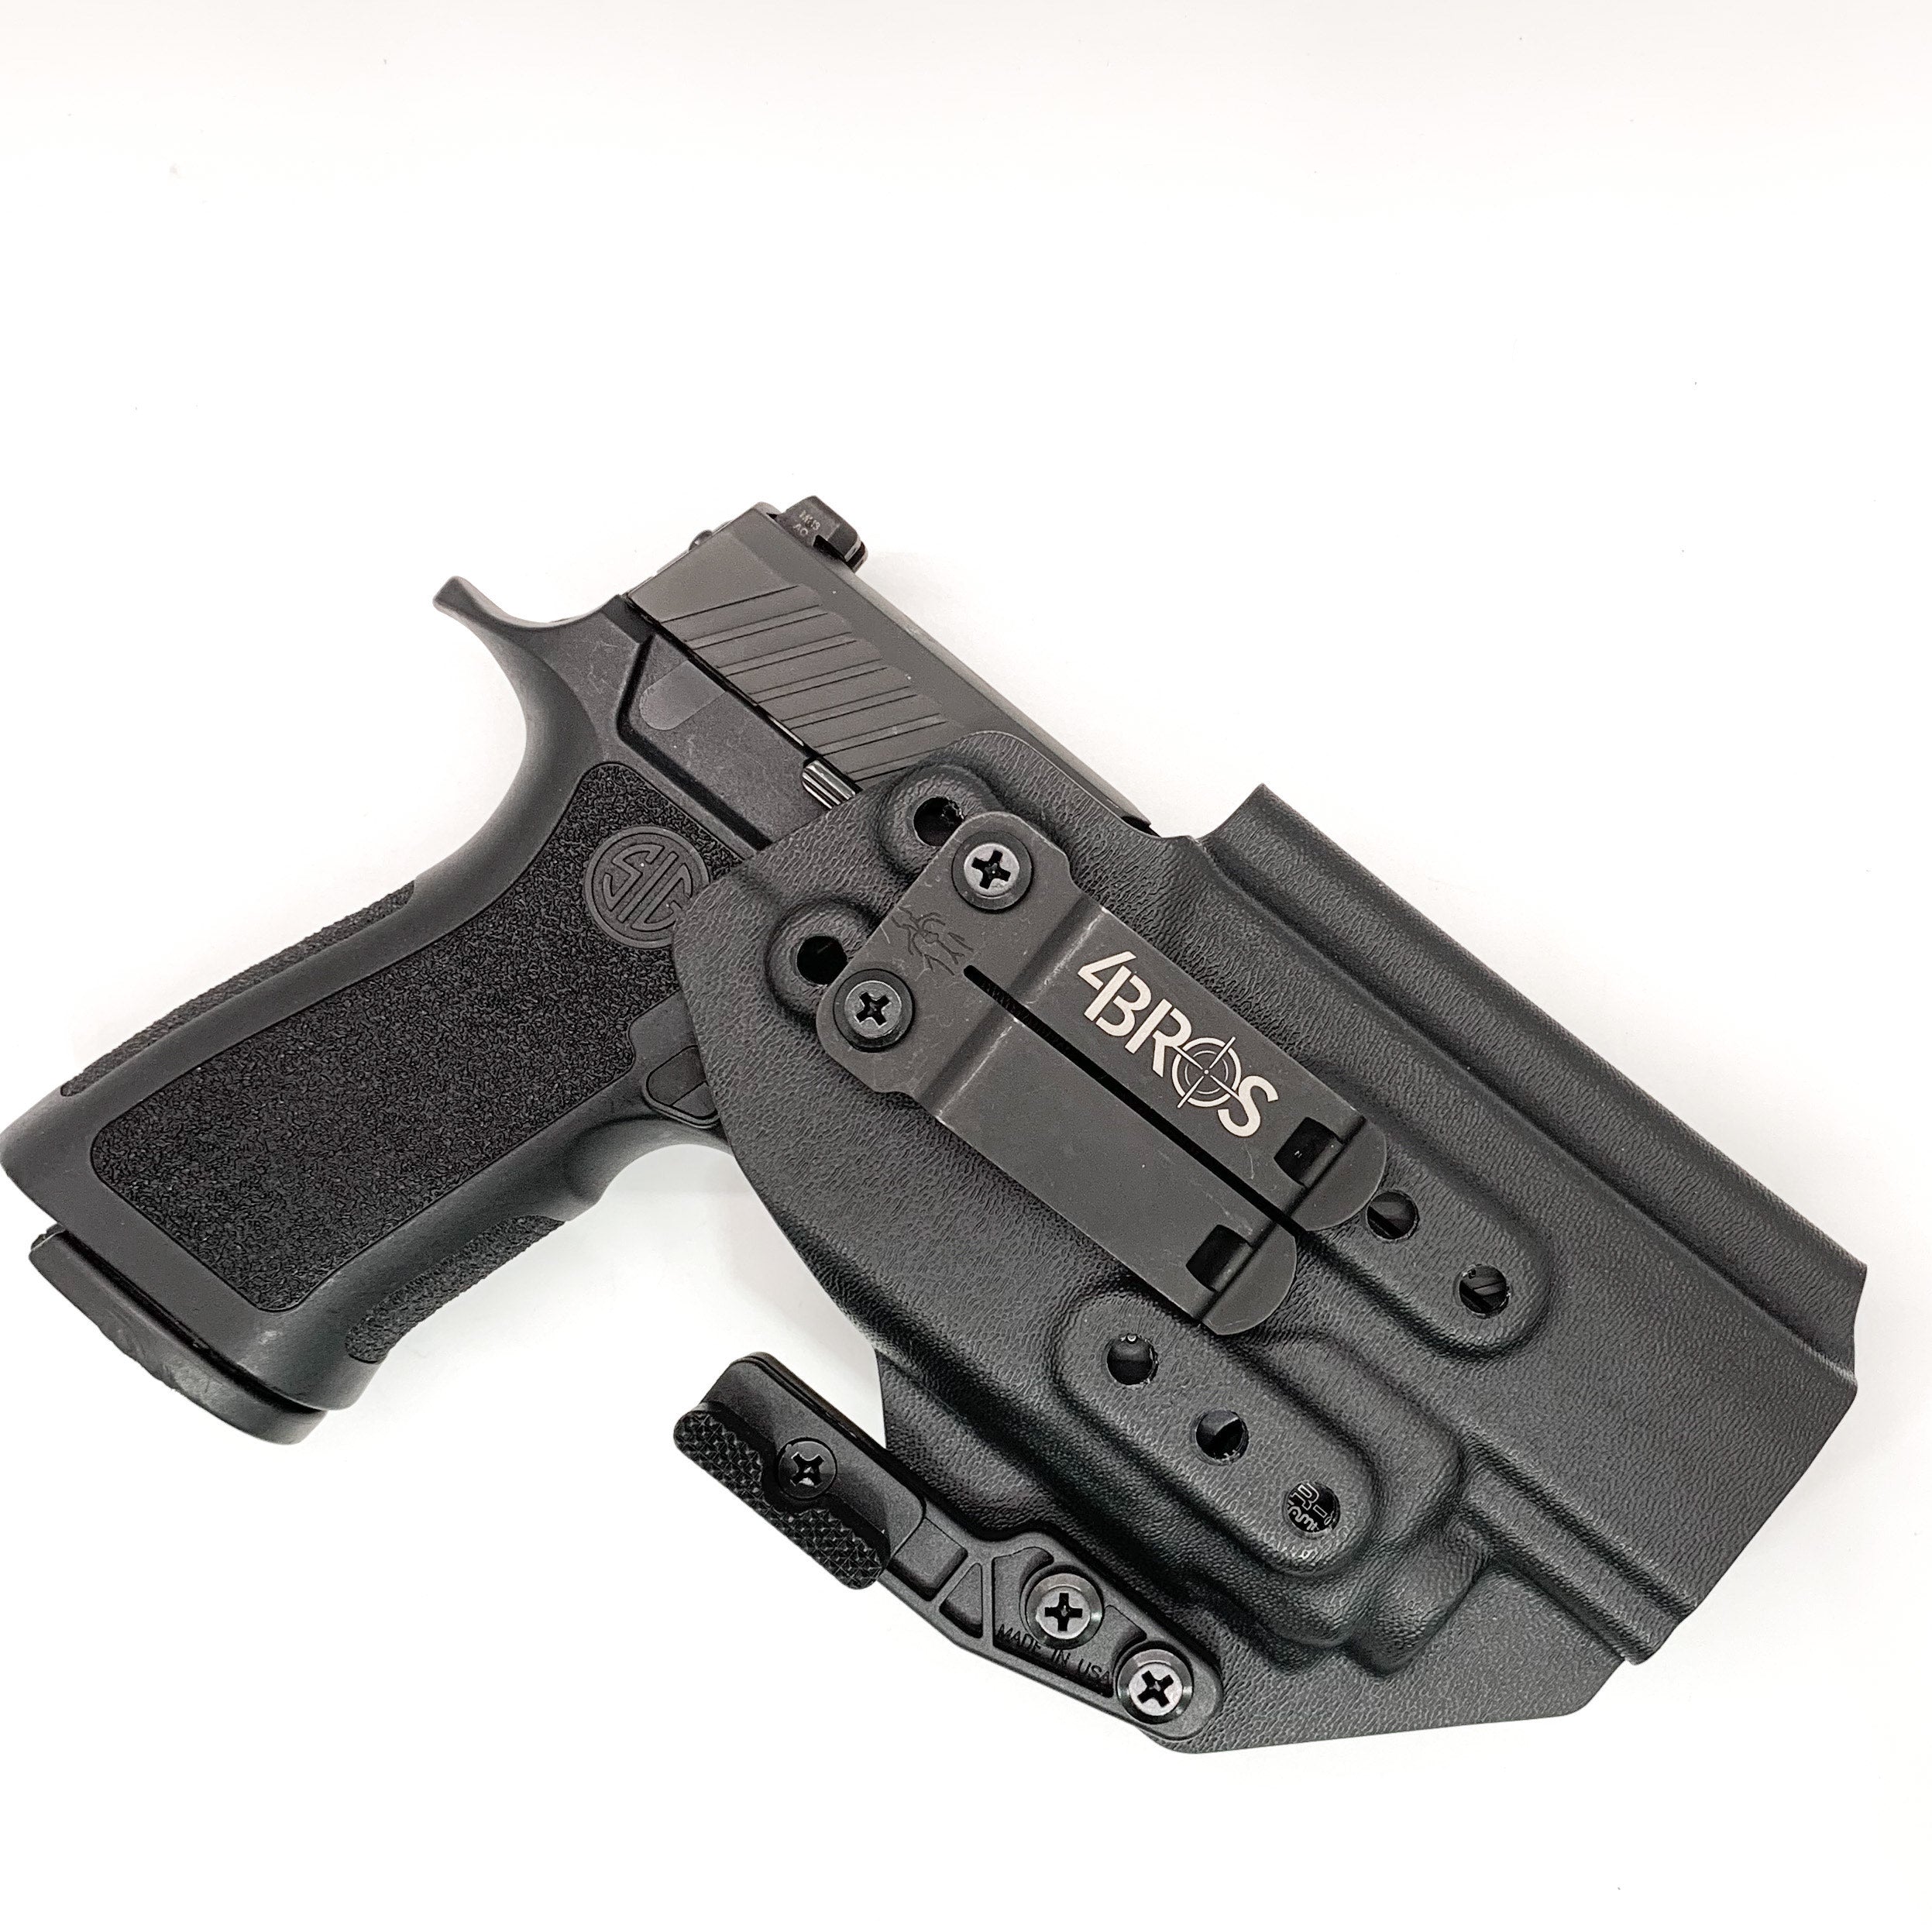 Inside Waistband Holster designed to fit the Sig Sauer P320 Full Size, X5, and M17 pistols with the Streamlight TLR-8 or TLR-8A light and Align Tactical Thumb Rest Takedown lever mounted to the pistol. The holster retention is on the light itself and not the pistol,  the holster will not work without the light.